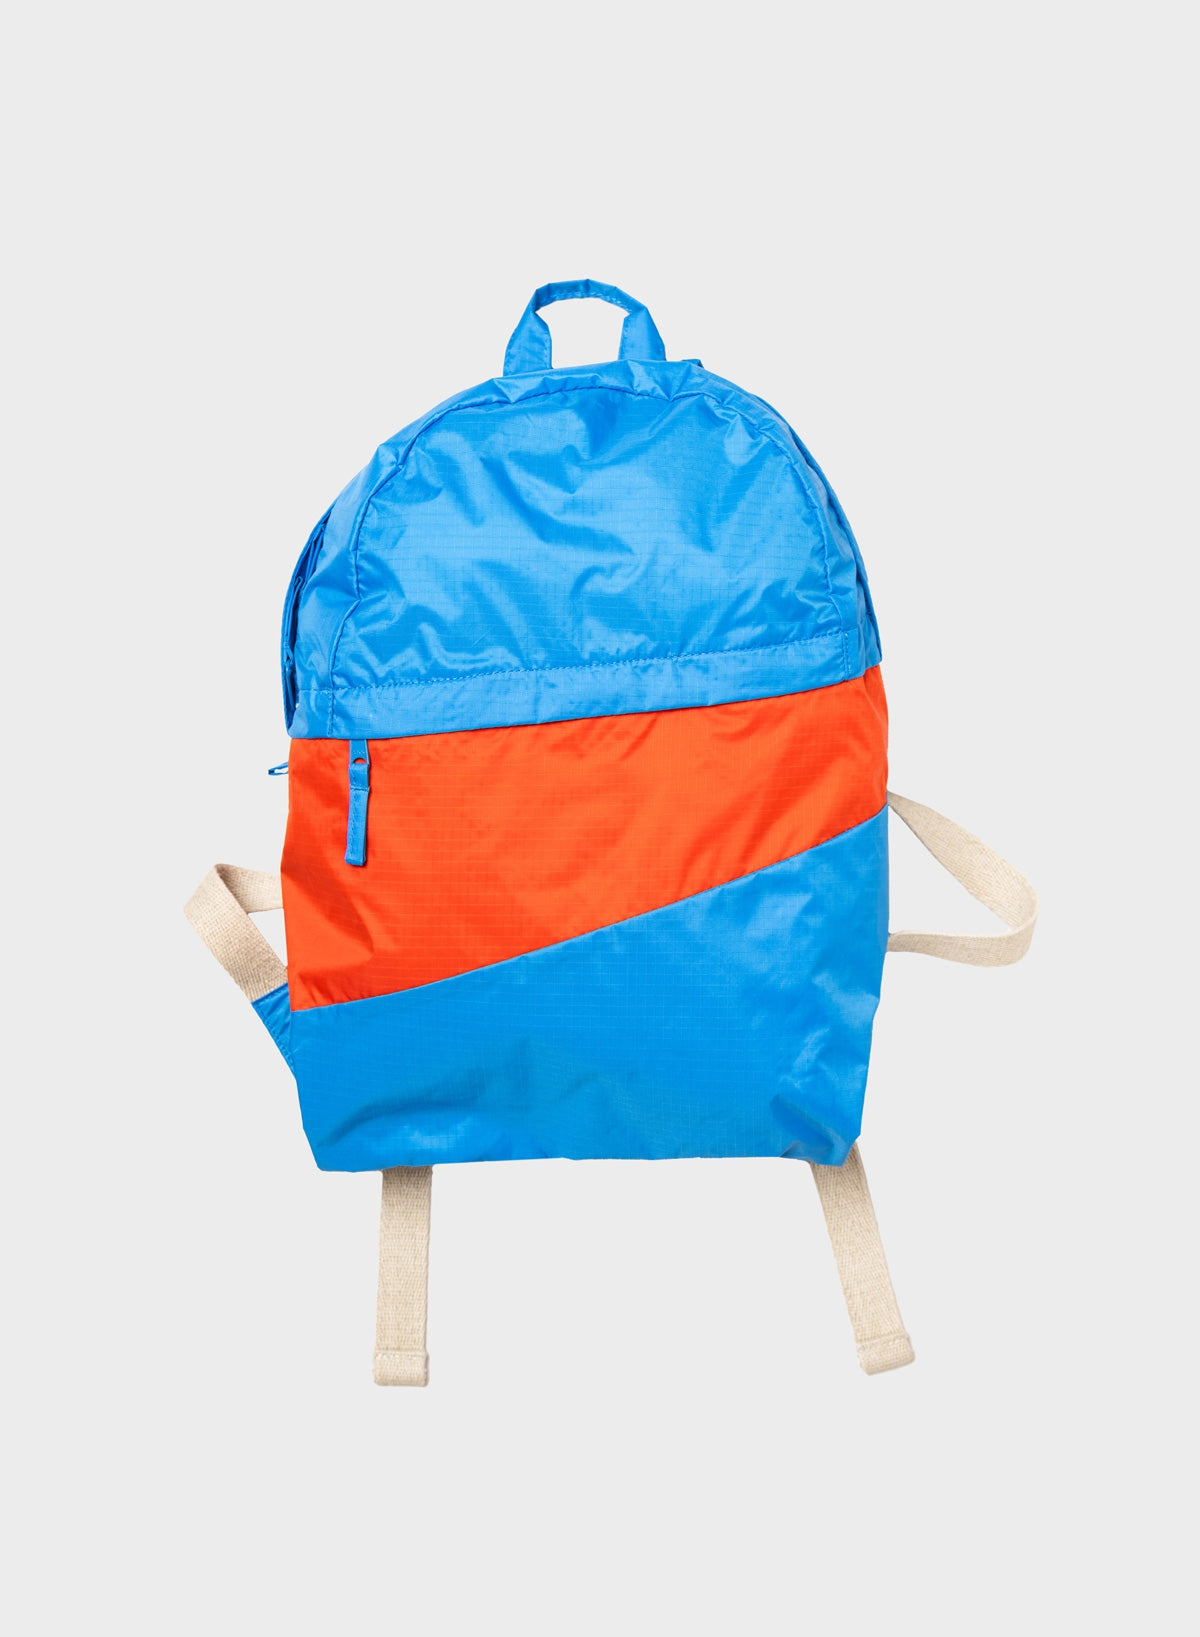 The New Foldable Backpack Wave & Red Alert Medium